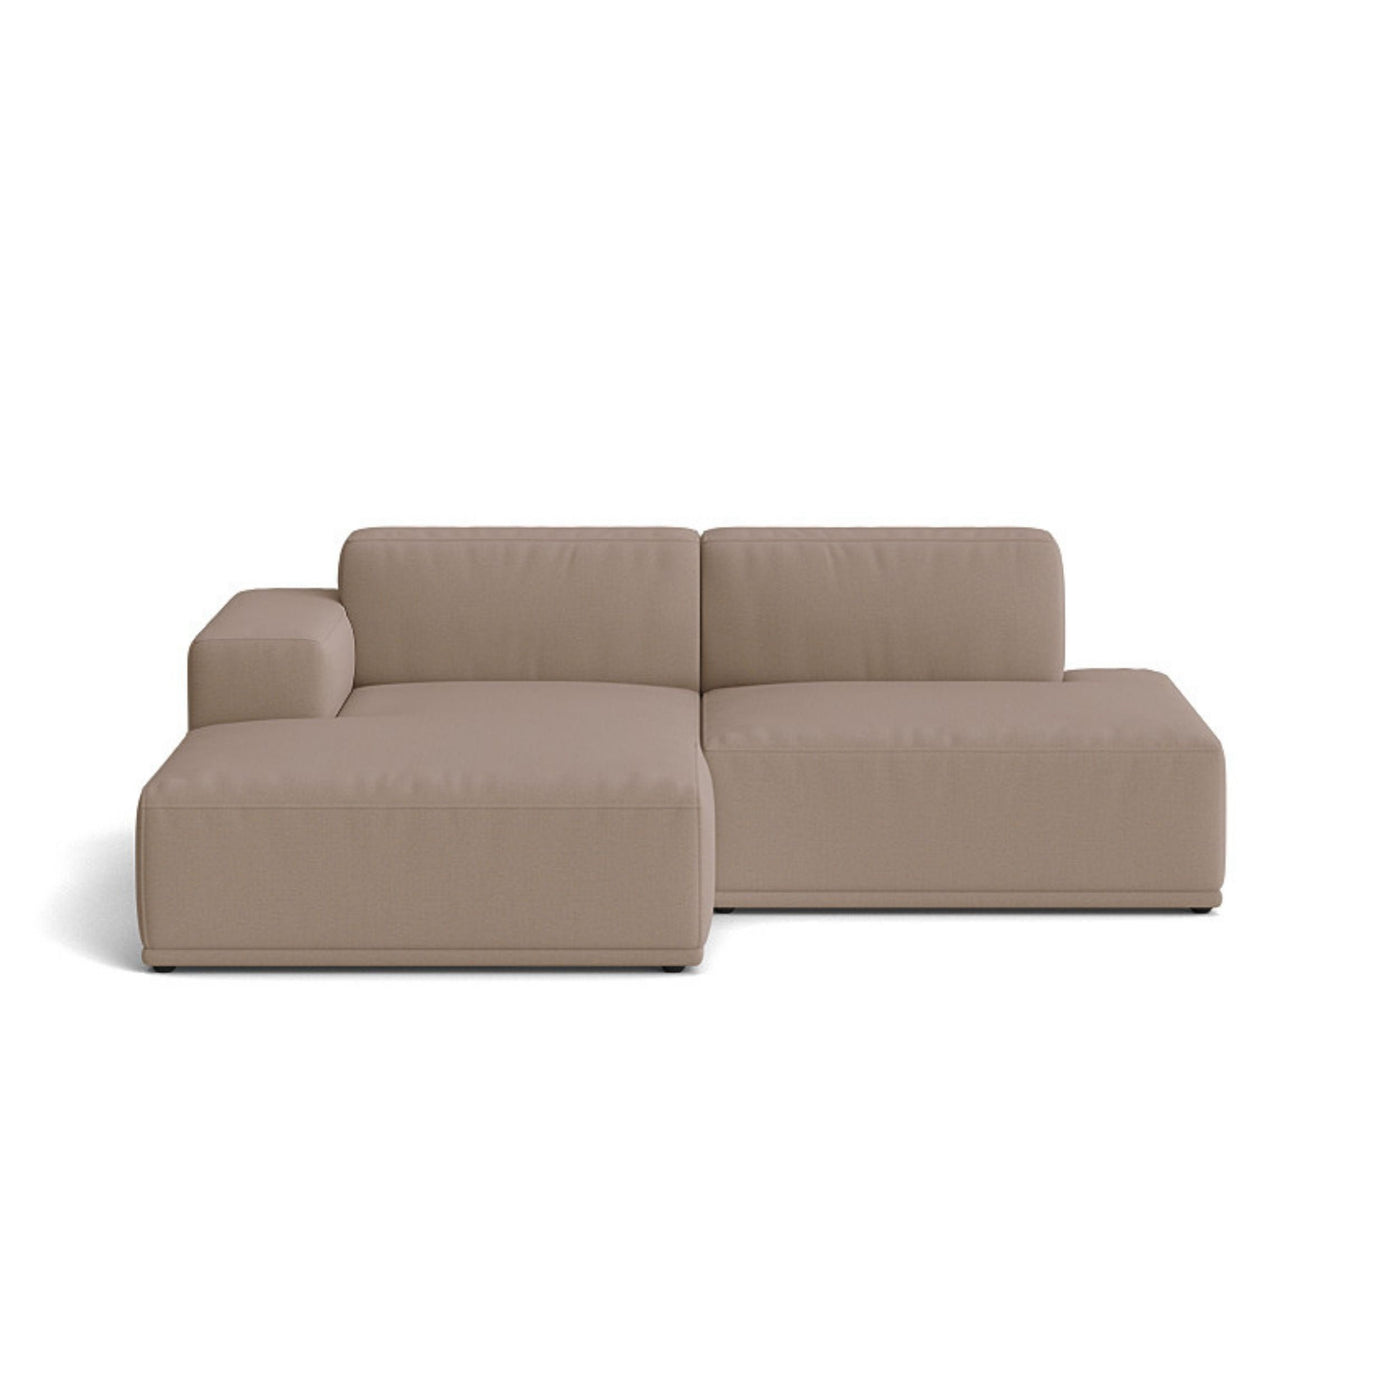 Muuto Connect Soft Modular 2 Seater Sofa, configuration 3. made-to-order from someday designs. #colour_steelcut-trio-426